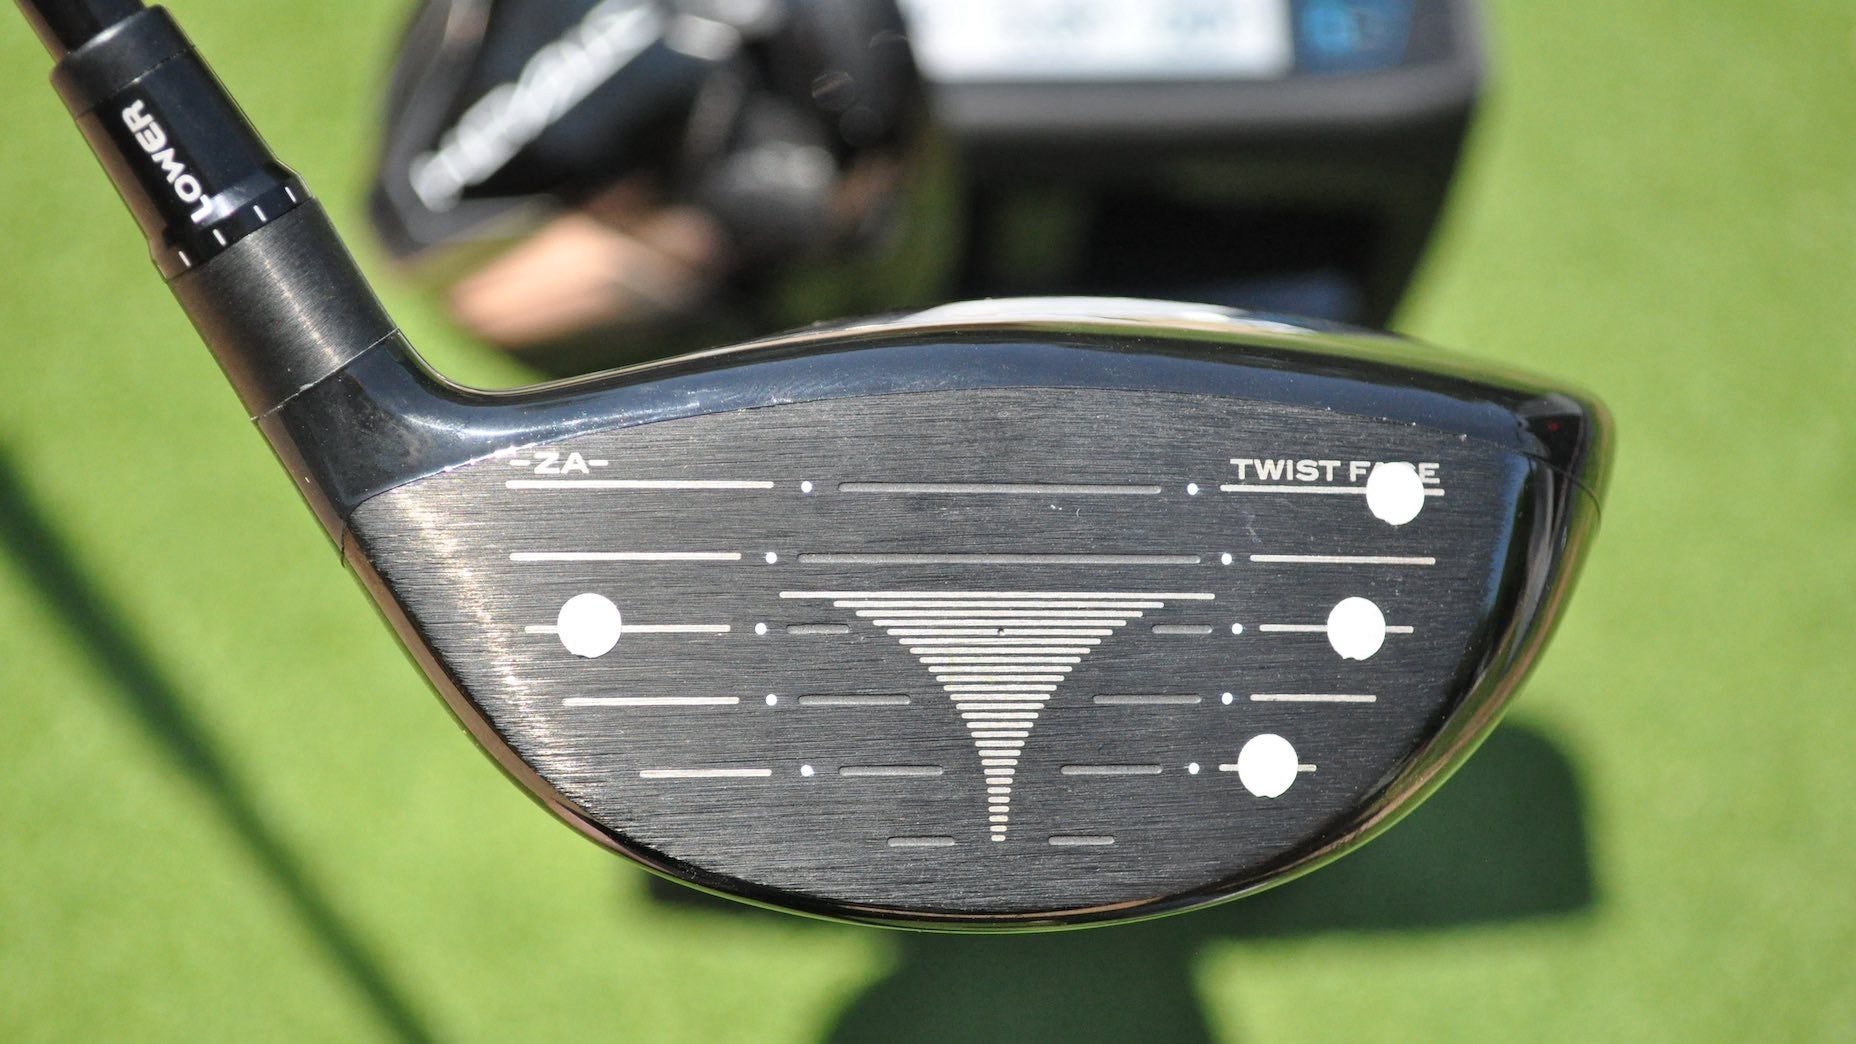 Can TaylorMade's BRNR Mini make a driver obsolete? We put it to 